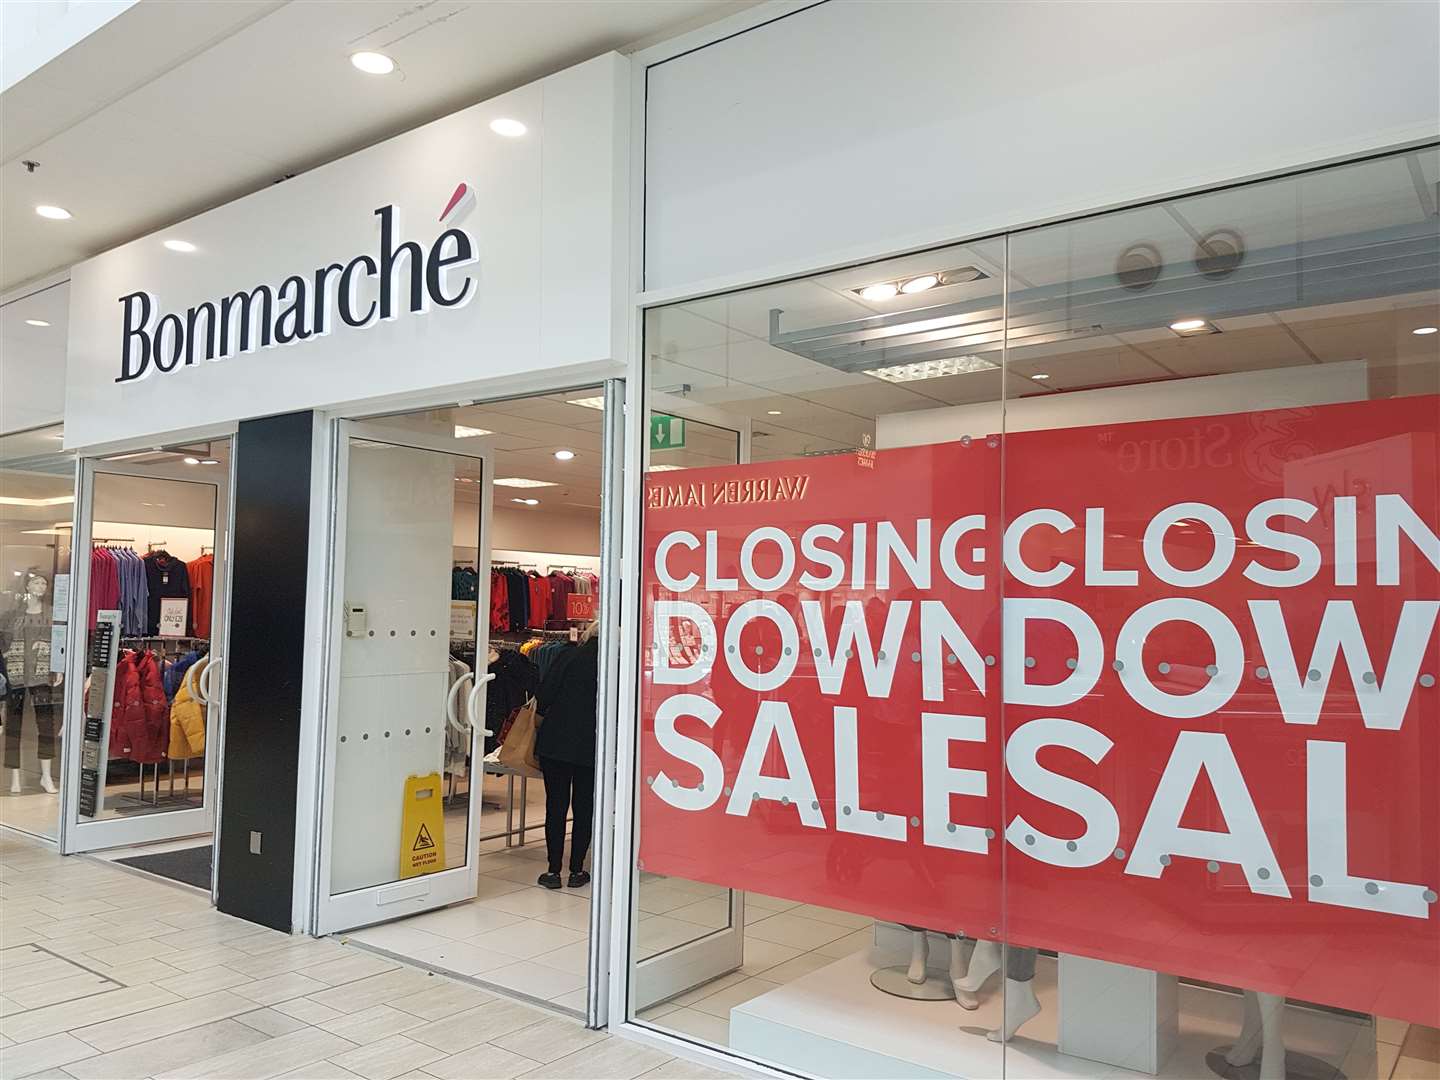 Signs appeared at the Ashford shop in November announcing closing down sales